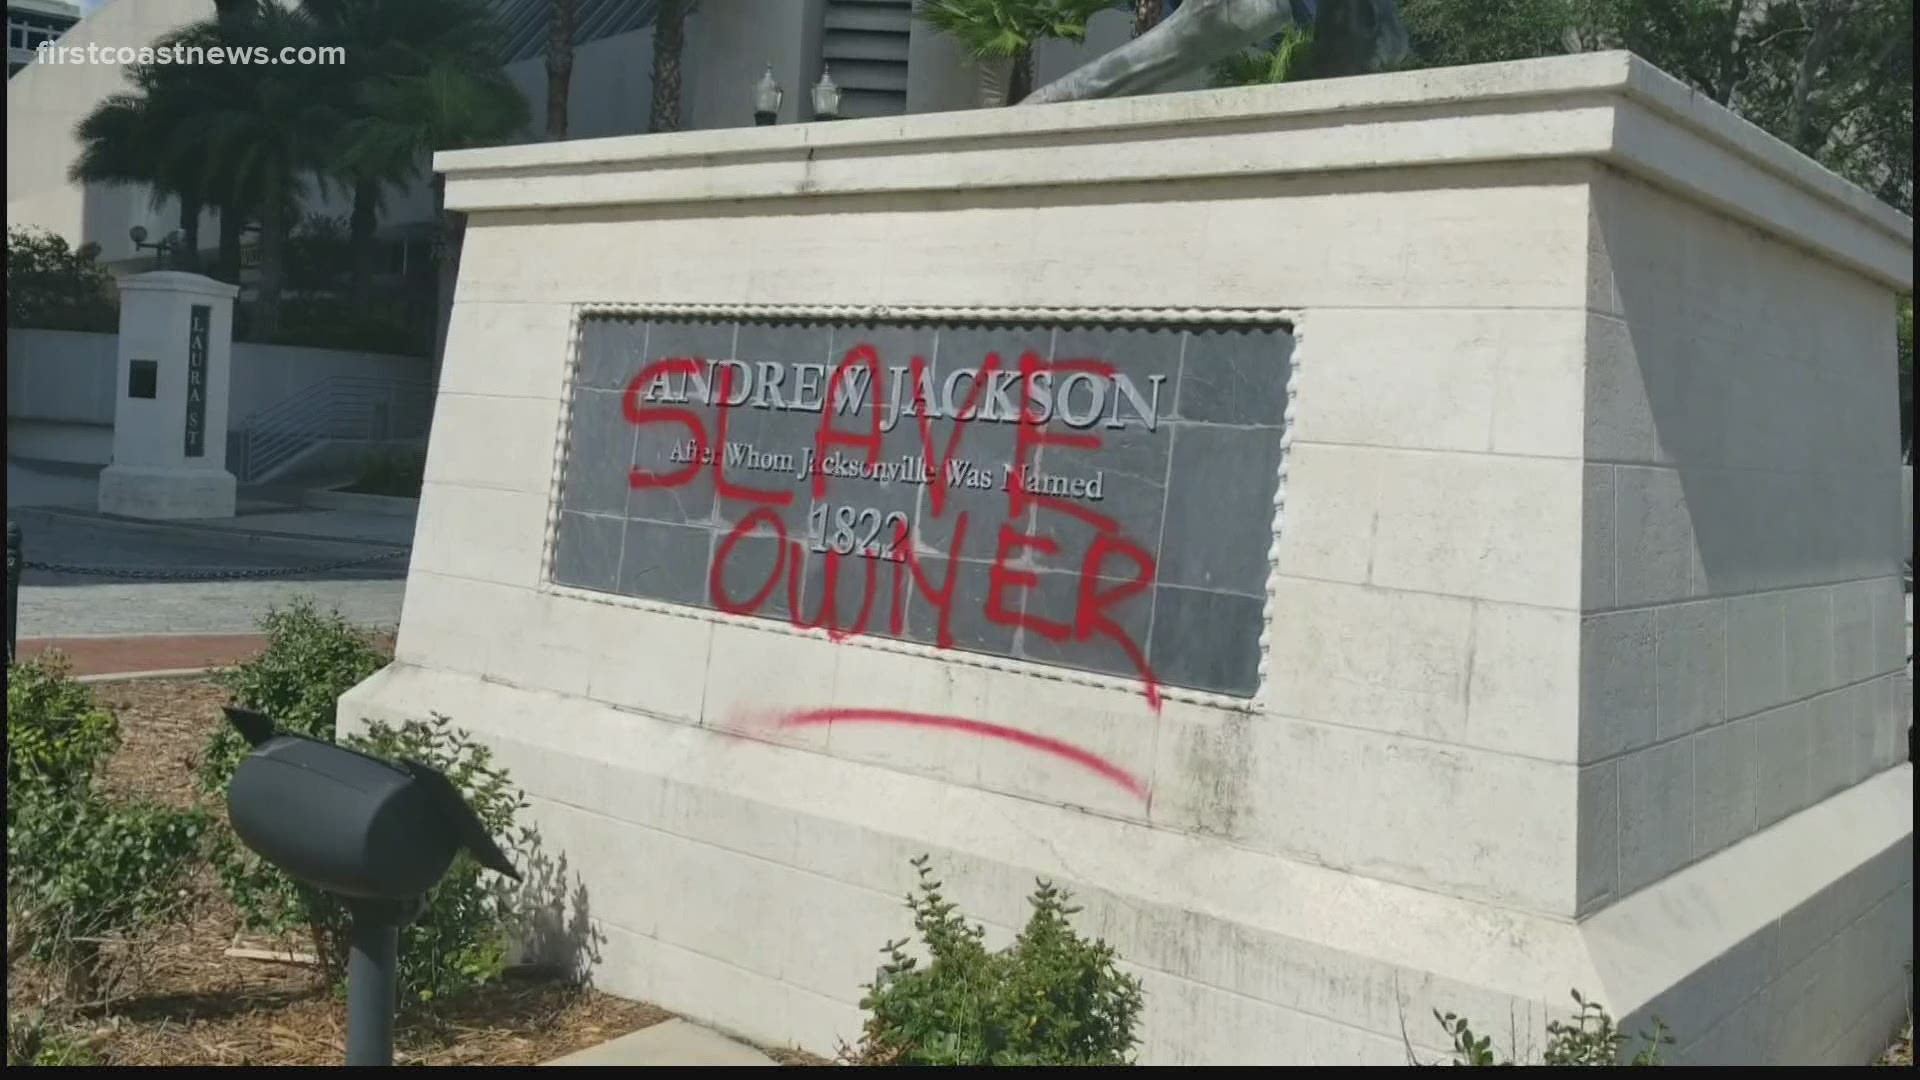 The Andrew Jackson statue was vandalized in Downtown Jacksonville.